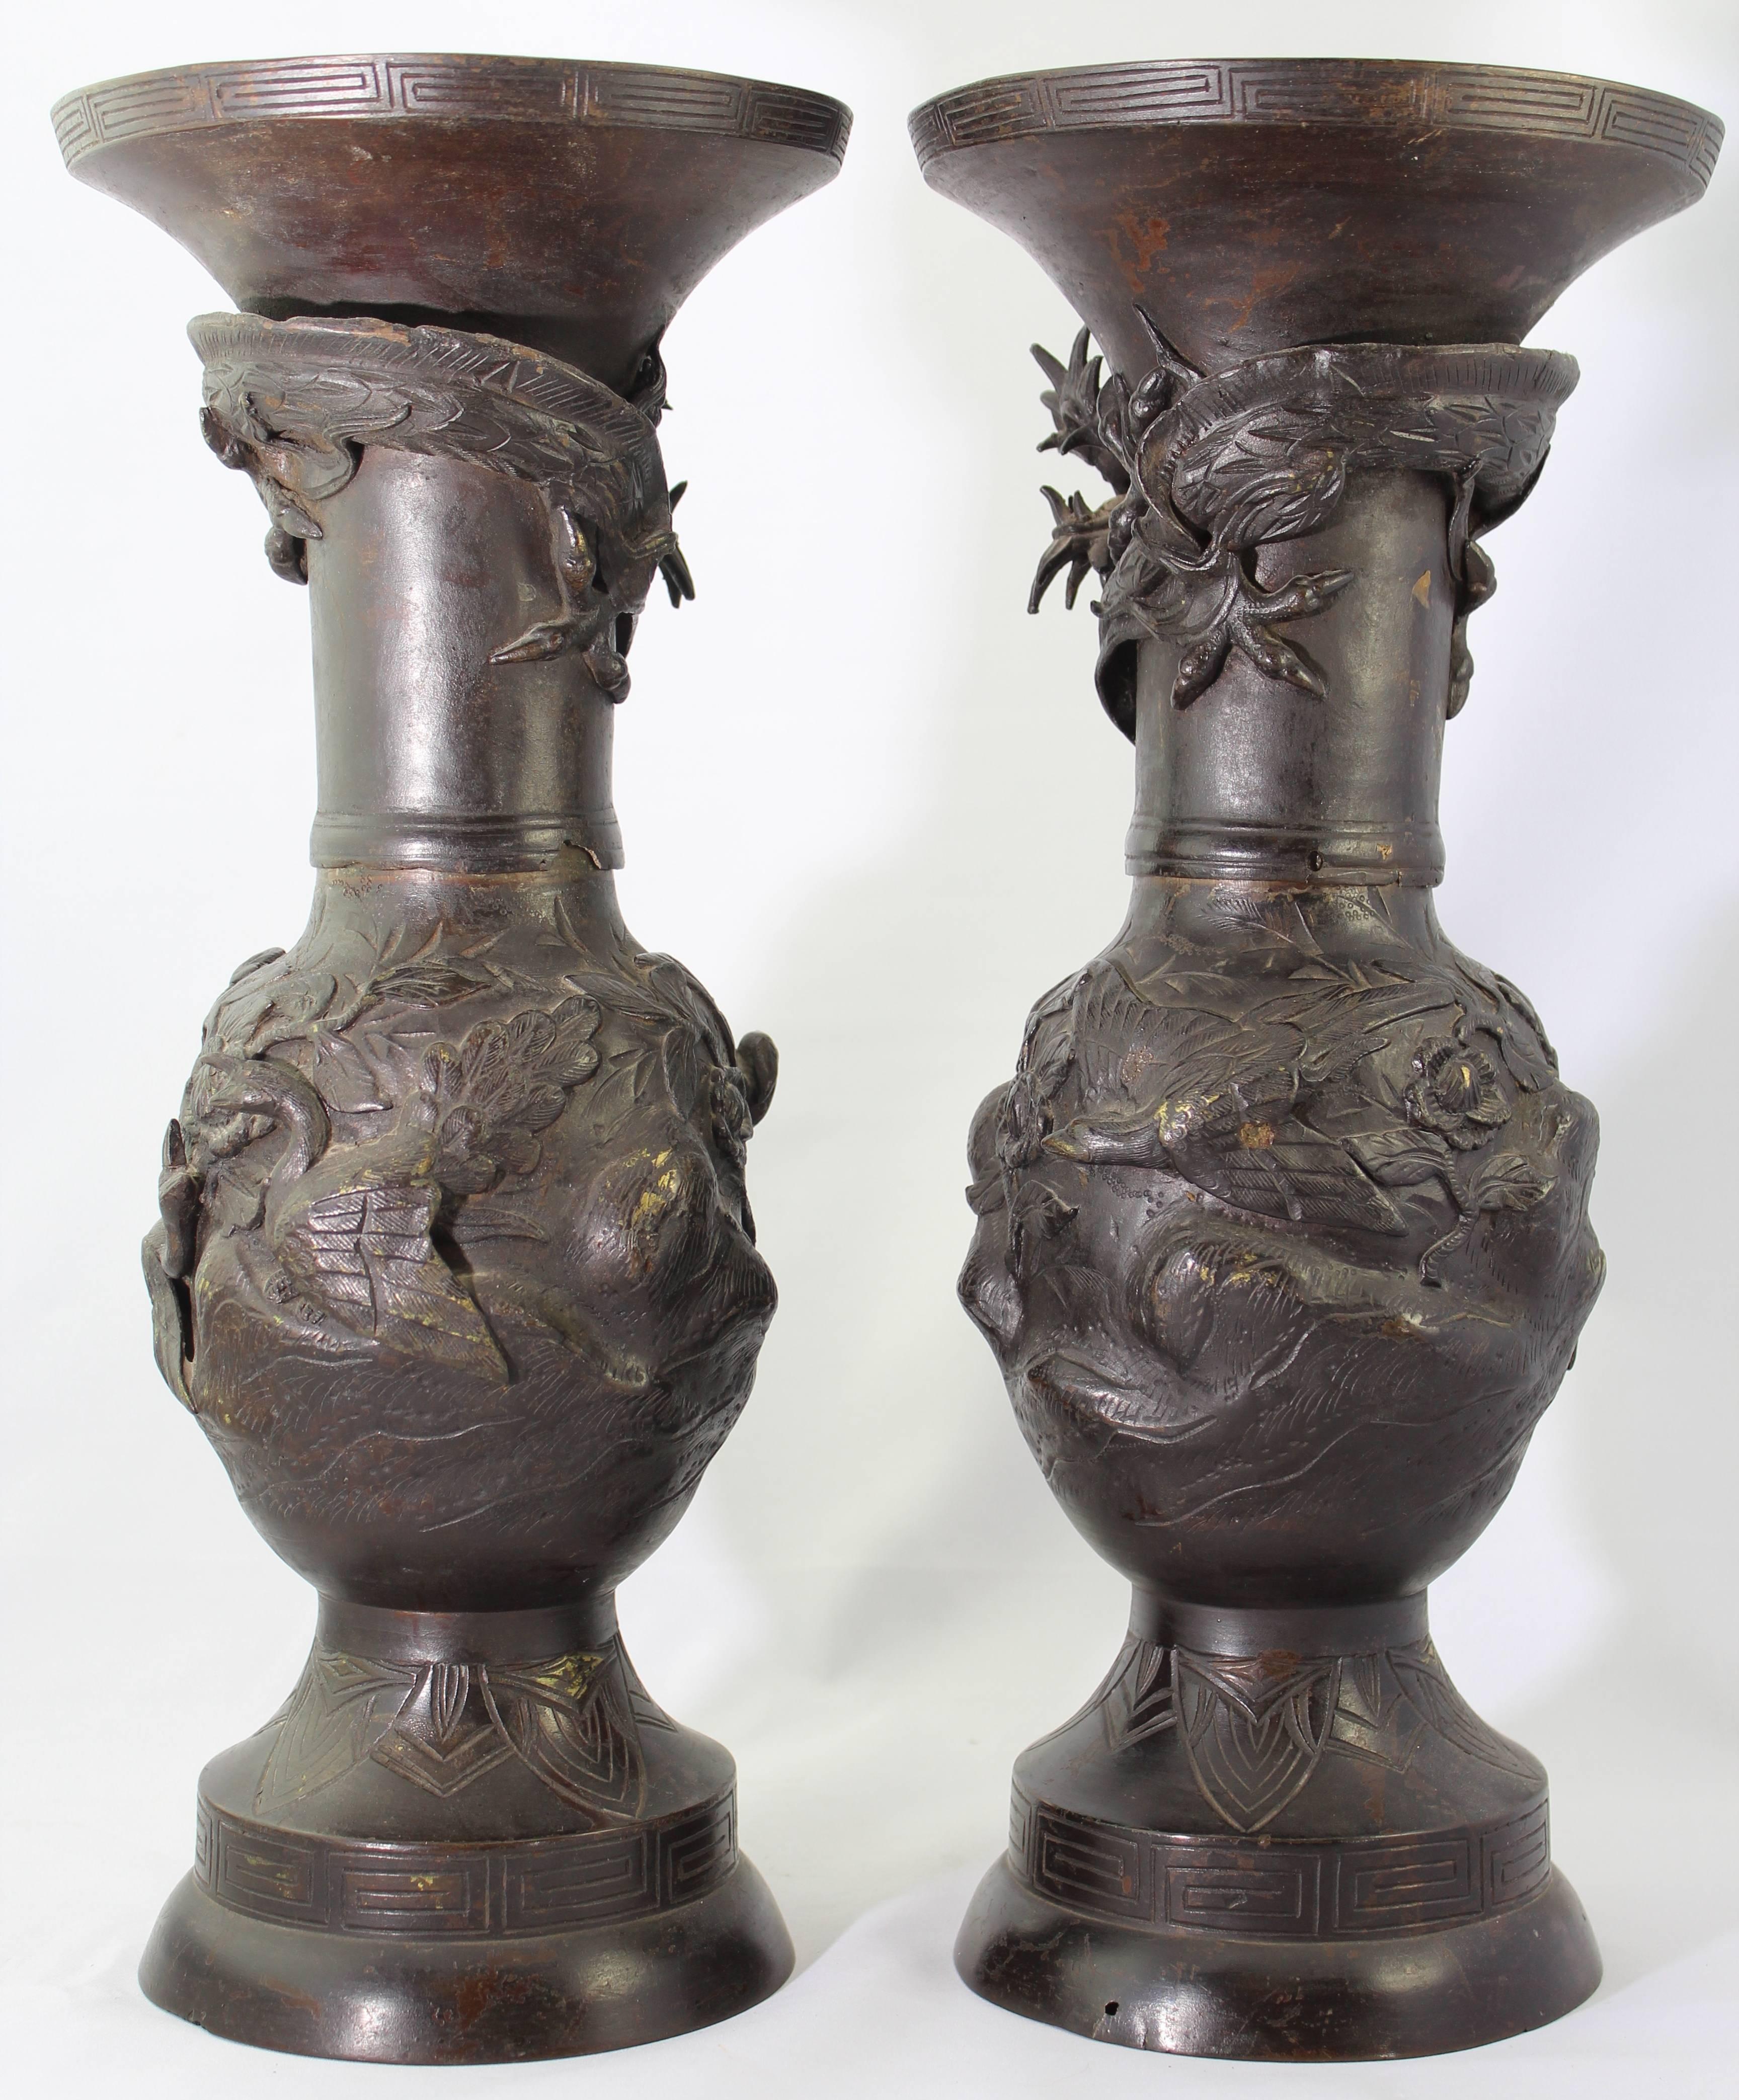 Pair Japanese Meiji Bronze dragon vases, 19th century.

Beautiful rich dark brown patina. Eagles, hawks, sparrows and dragons.

Wear commensurate of age: Losses and scratches. Displays beautifully.

Measures: Height 14.5 inches, width 6.25.